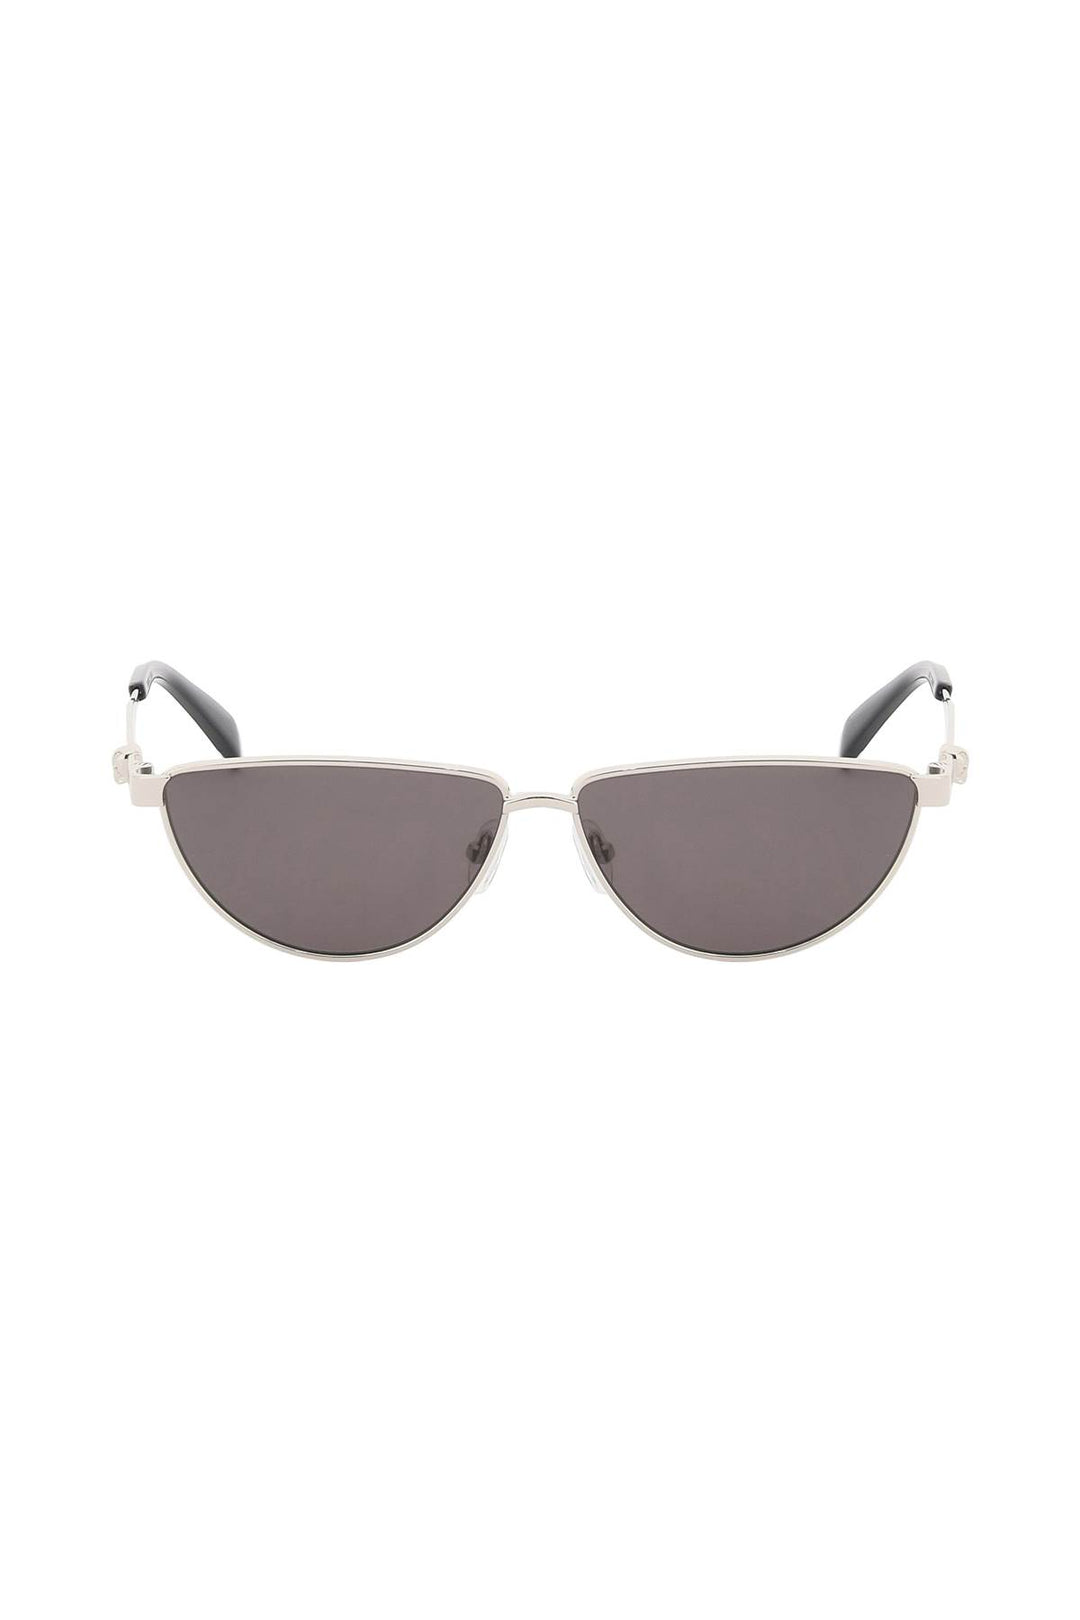 Alexander mcqueen "skull detail sunglasses with sun protection-0